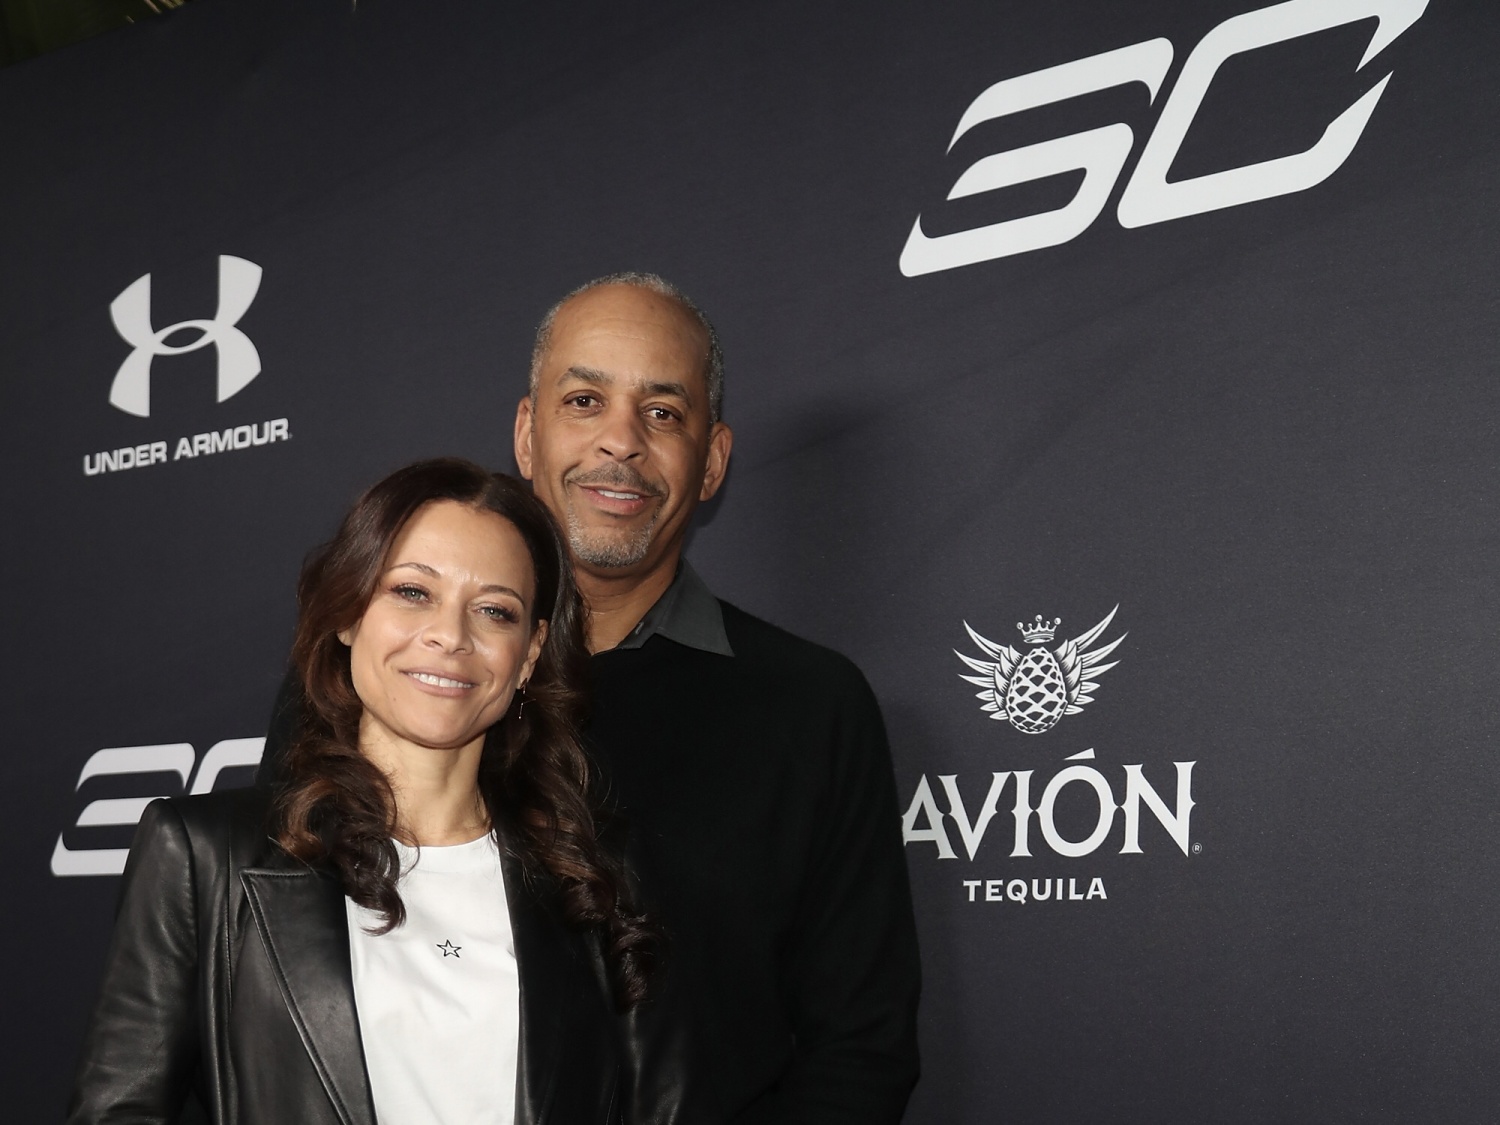 Dell and Sonya Curry